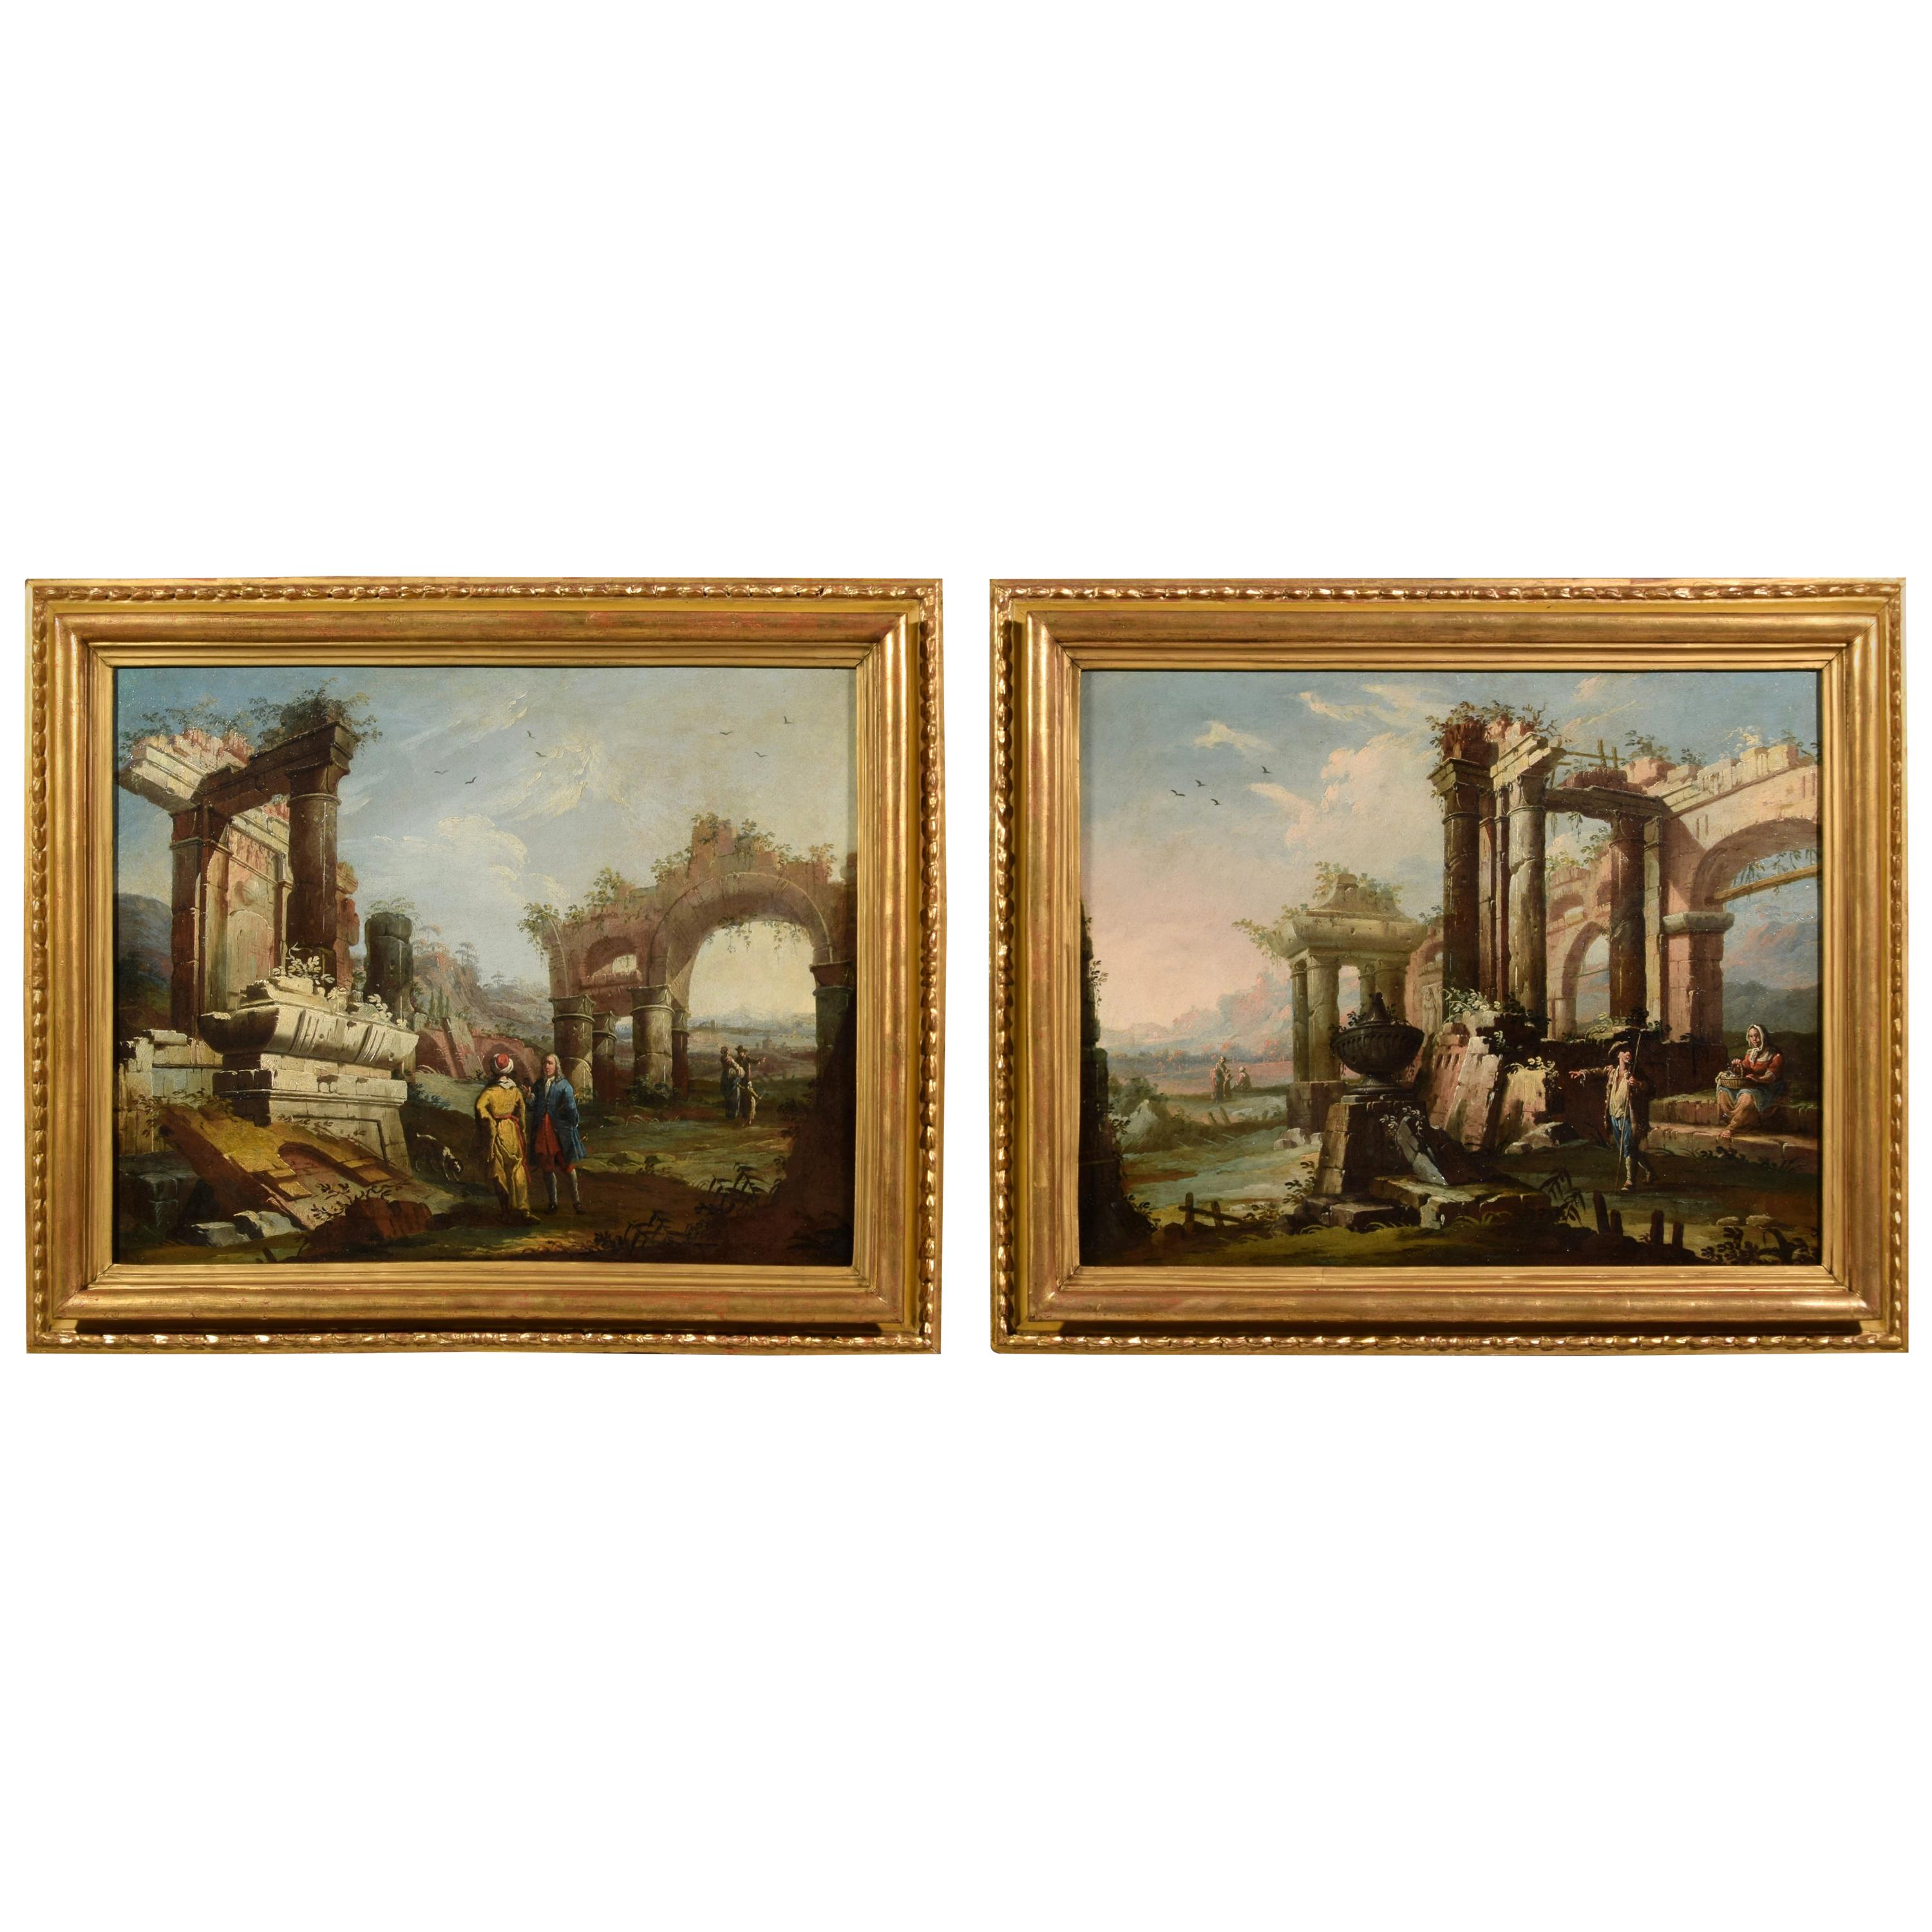 18th Century, Pair of Italian Paintings, Landscapes with Ruins by Gaetano Ottani